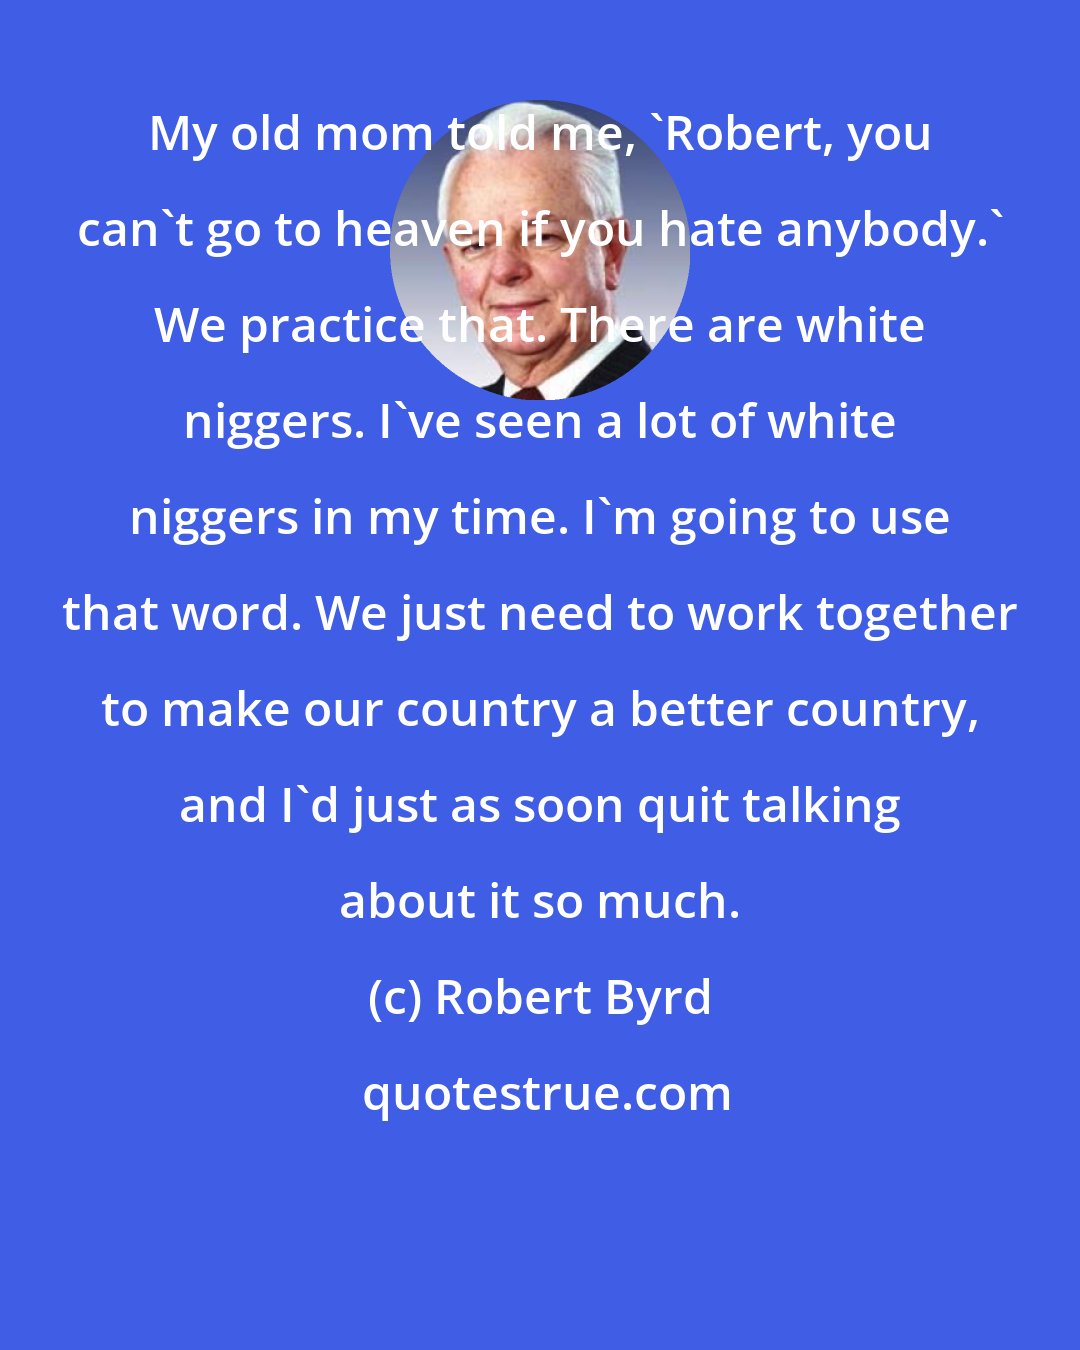 Robert Byrd: My old mom told me, 'Robert, you can't go to heaven if you hate anybody.' We practice that. There are white niggers. I've seen a lot of white niggers in my time. I'm going to use that word. We just need to work together to make our country a better country, and I'd just as soon quit talking about it so much.